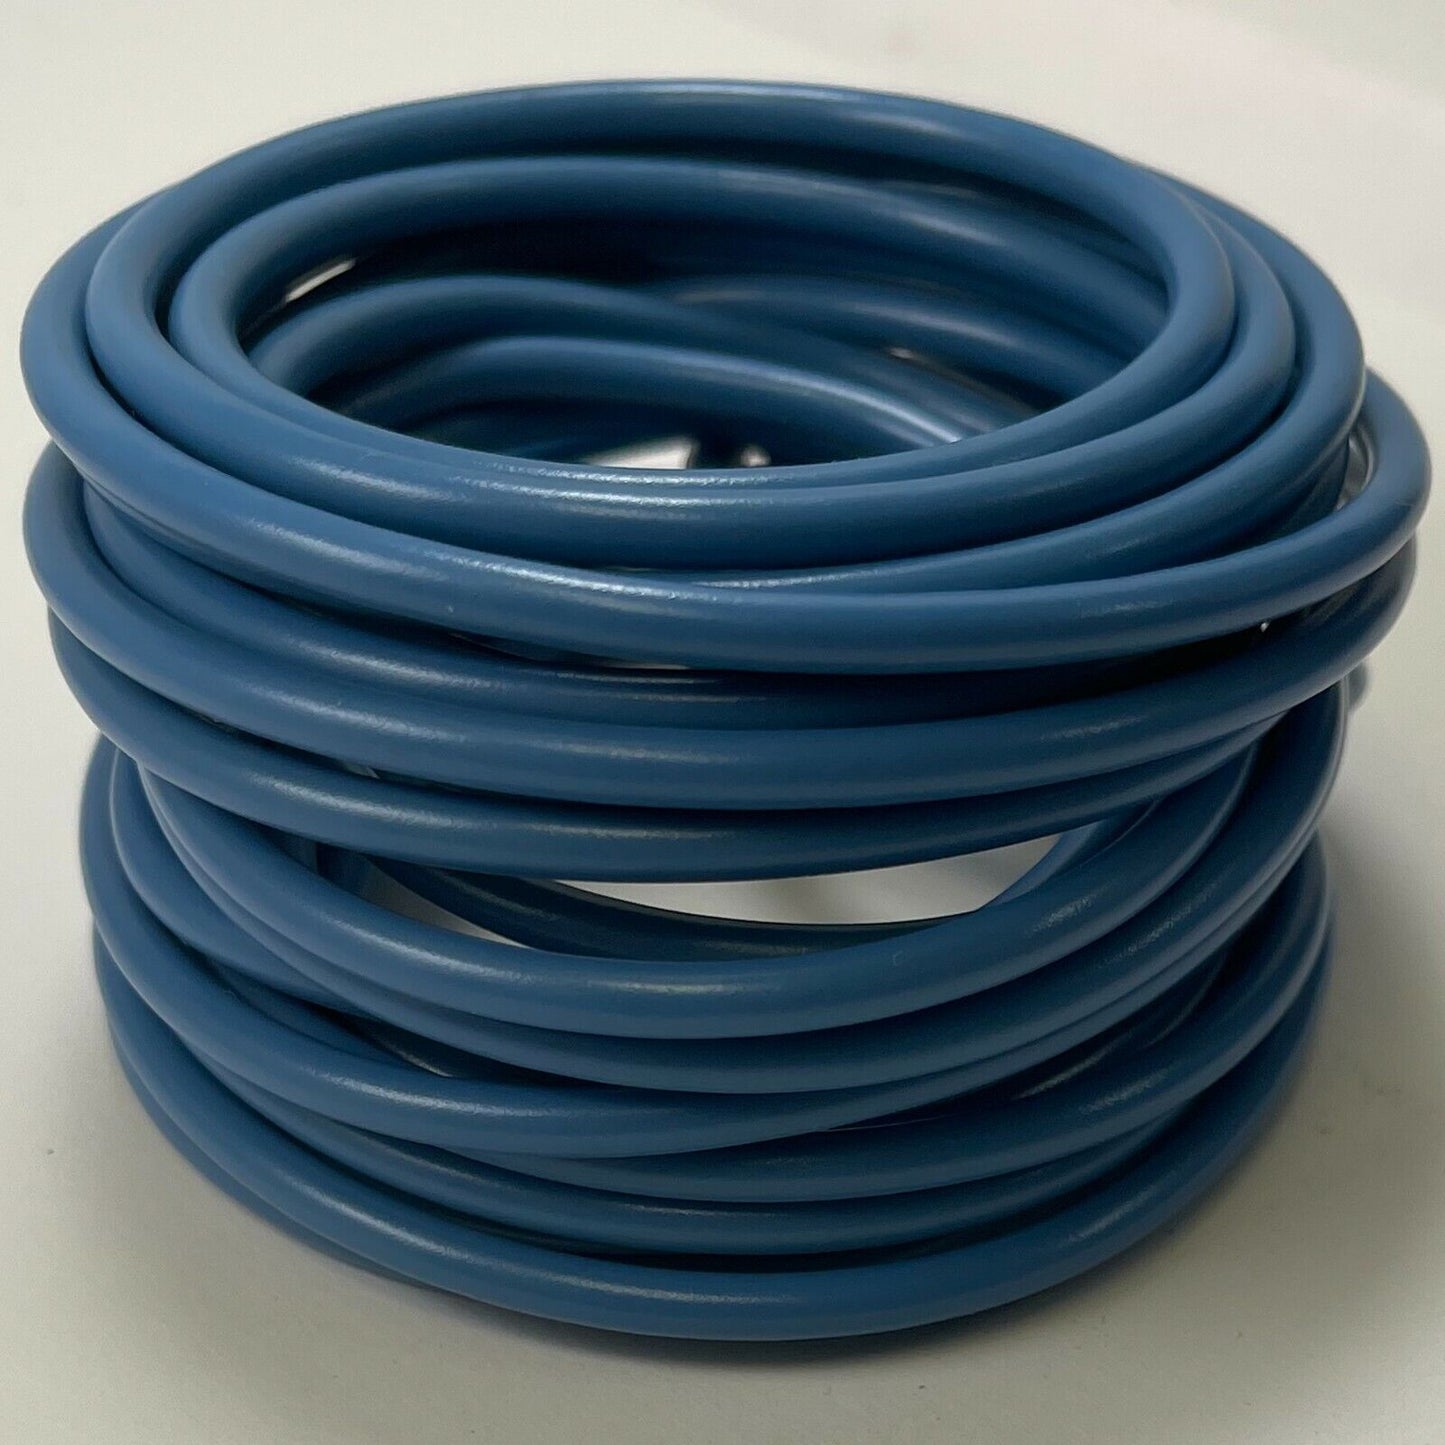 2 Pack of Automotive Primary Wire 16 Gauge 28 FT - Blue